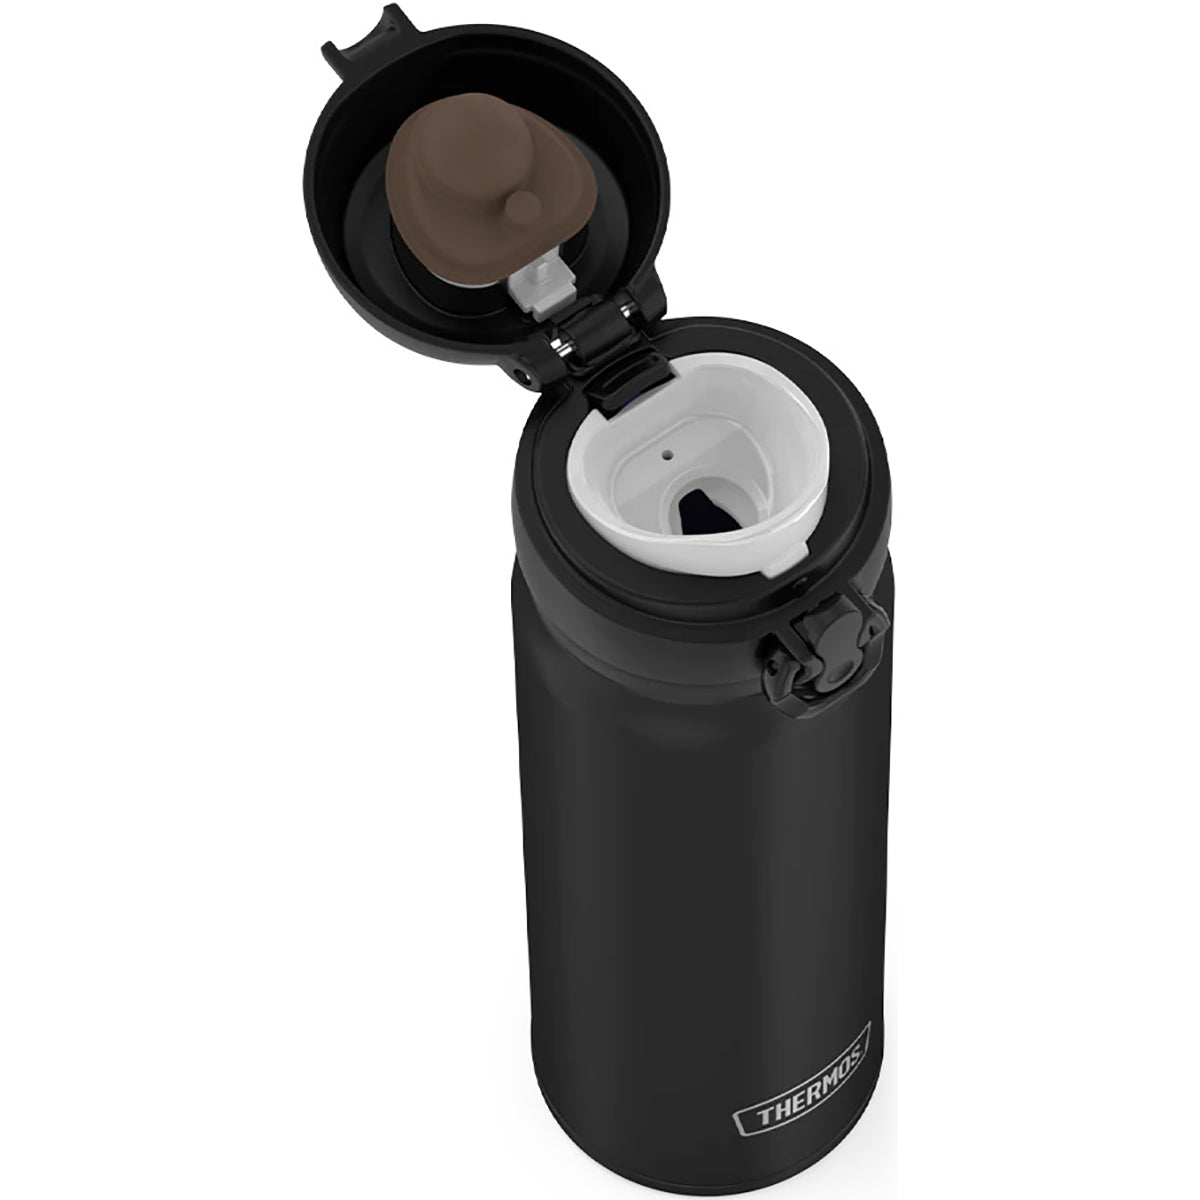 Thermos 16 oz. Vacuum Insulated Stainless Steel Direct Drink Bottle - Black Thermos